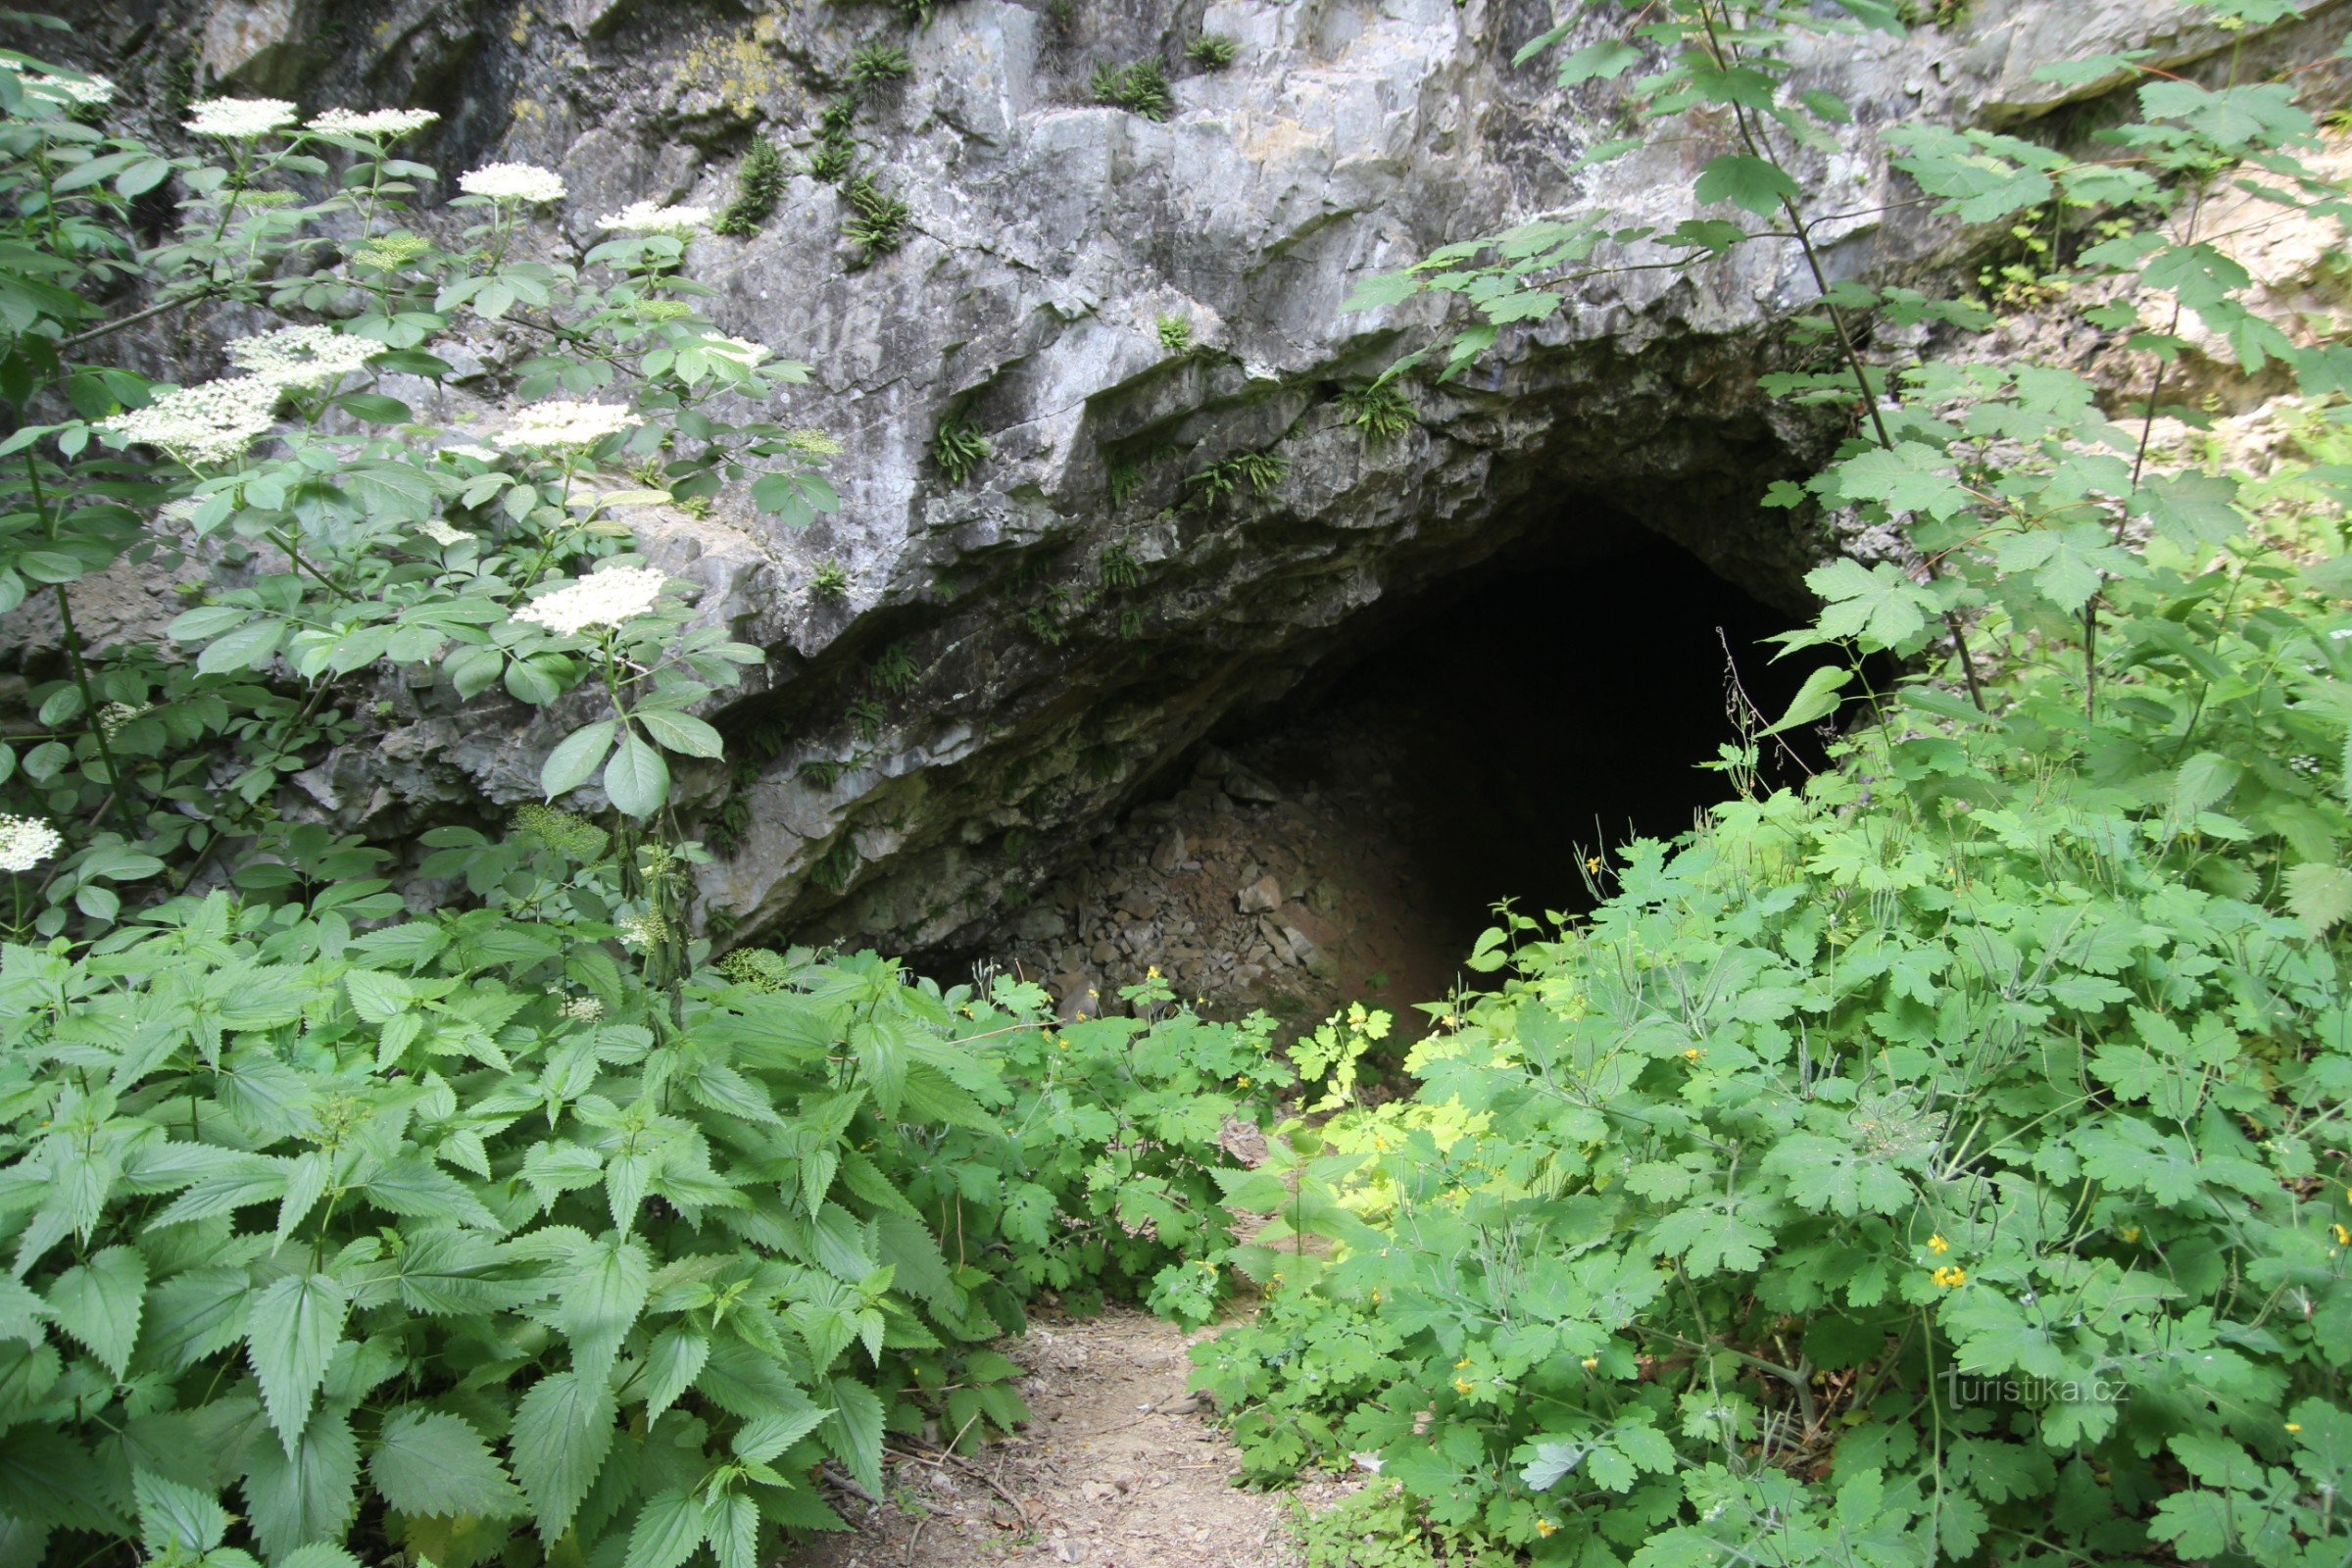 Today's cave entrance